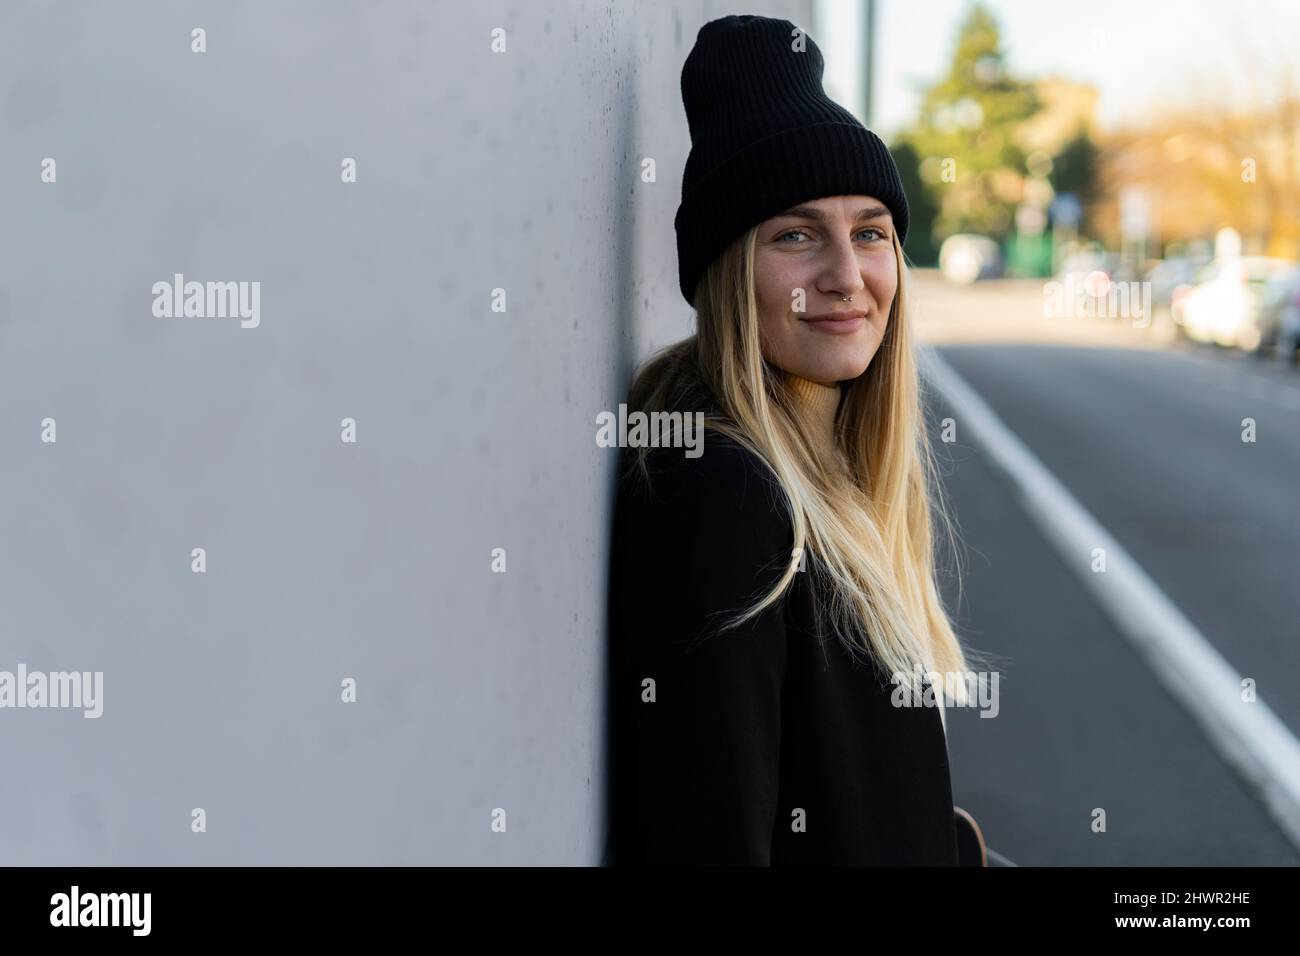 Smiling woman with knit hat on street Stock Photo